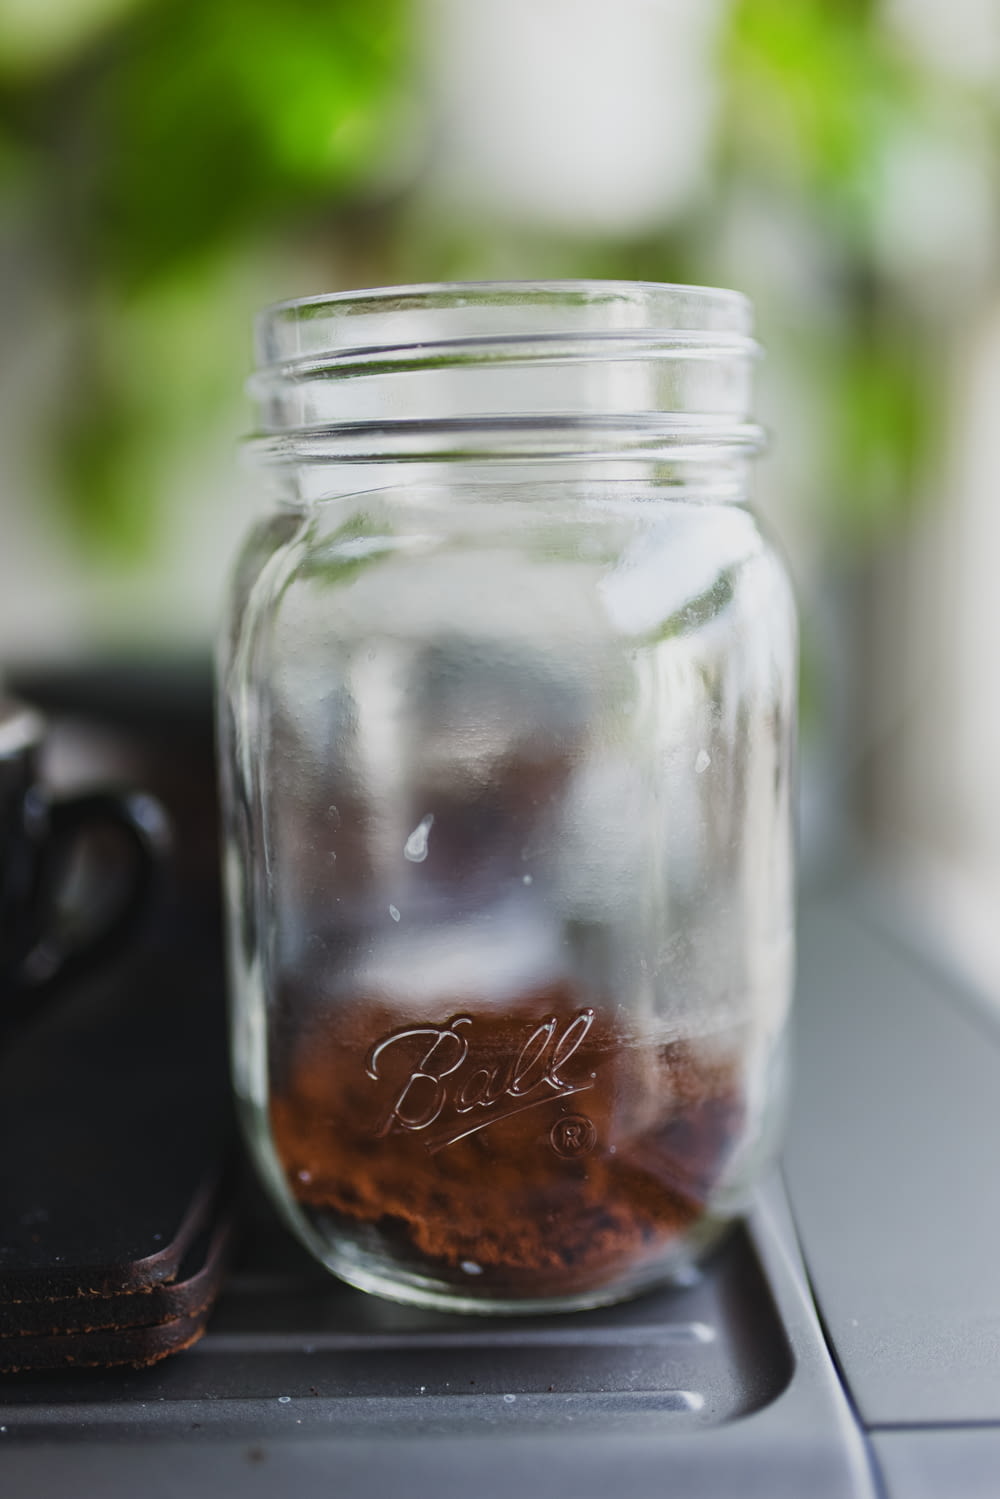 clear glass jar with brown liquid inside